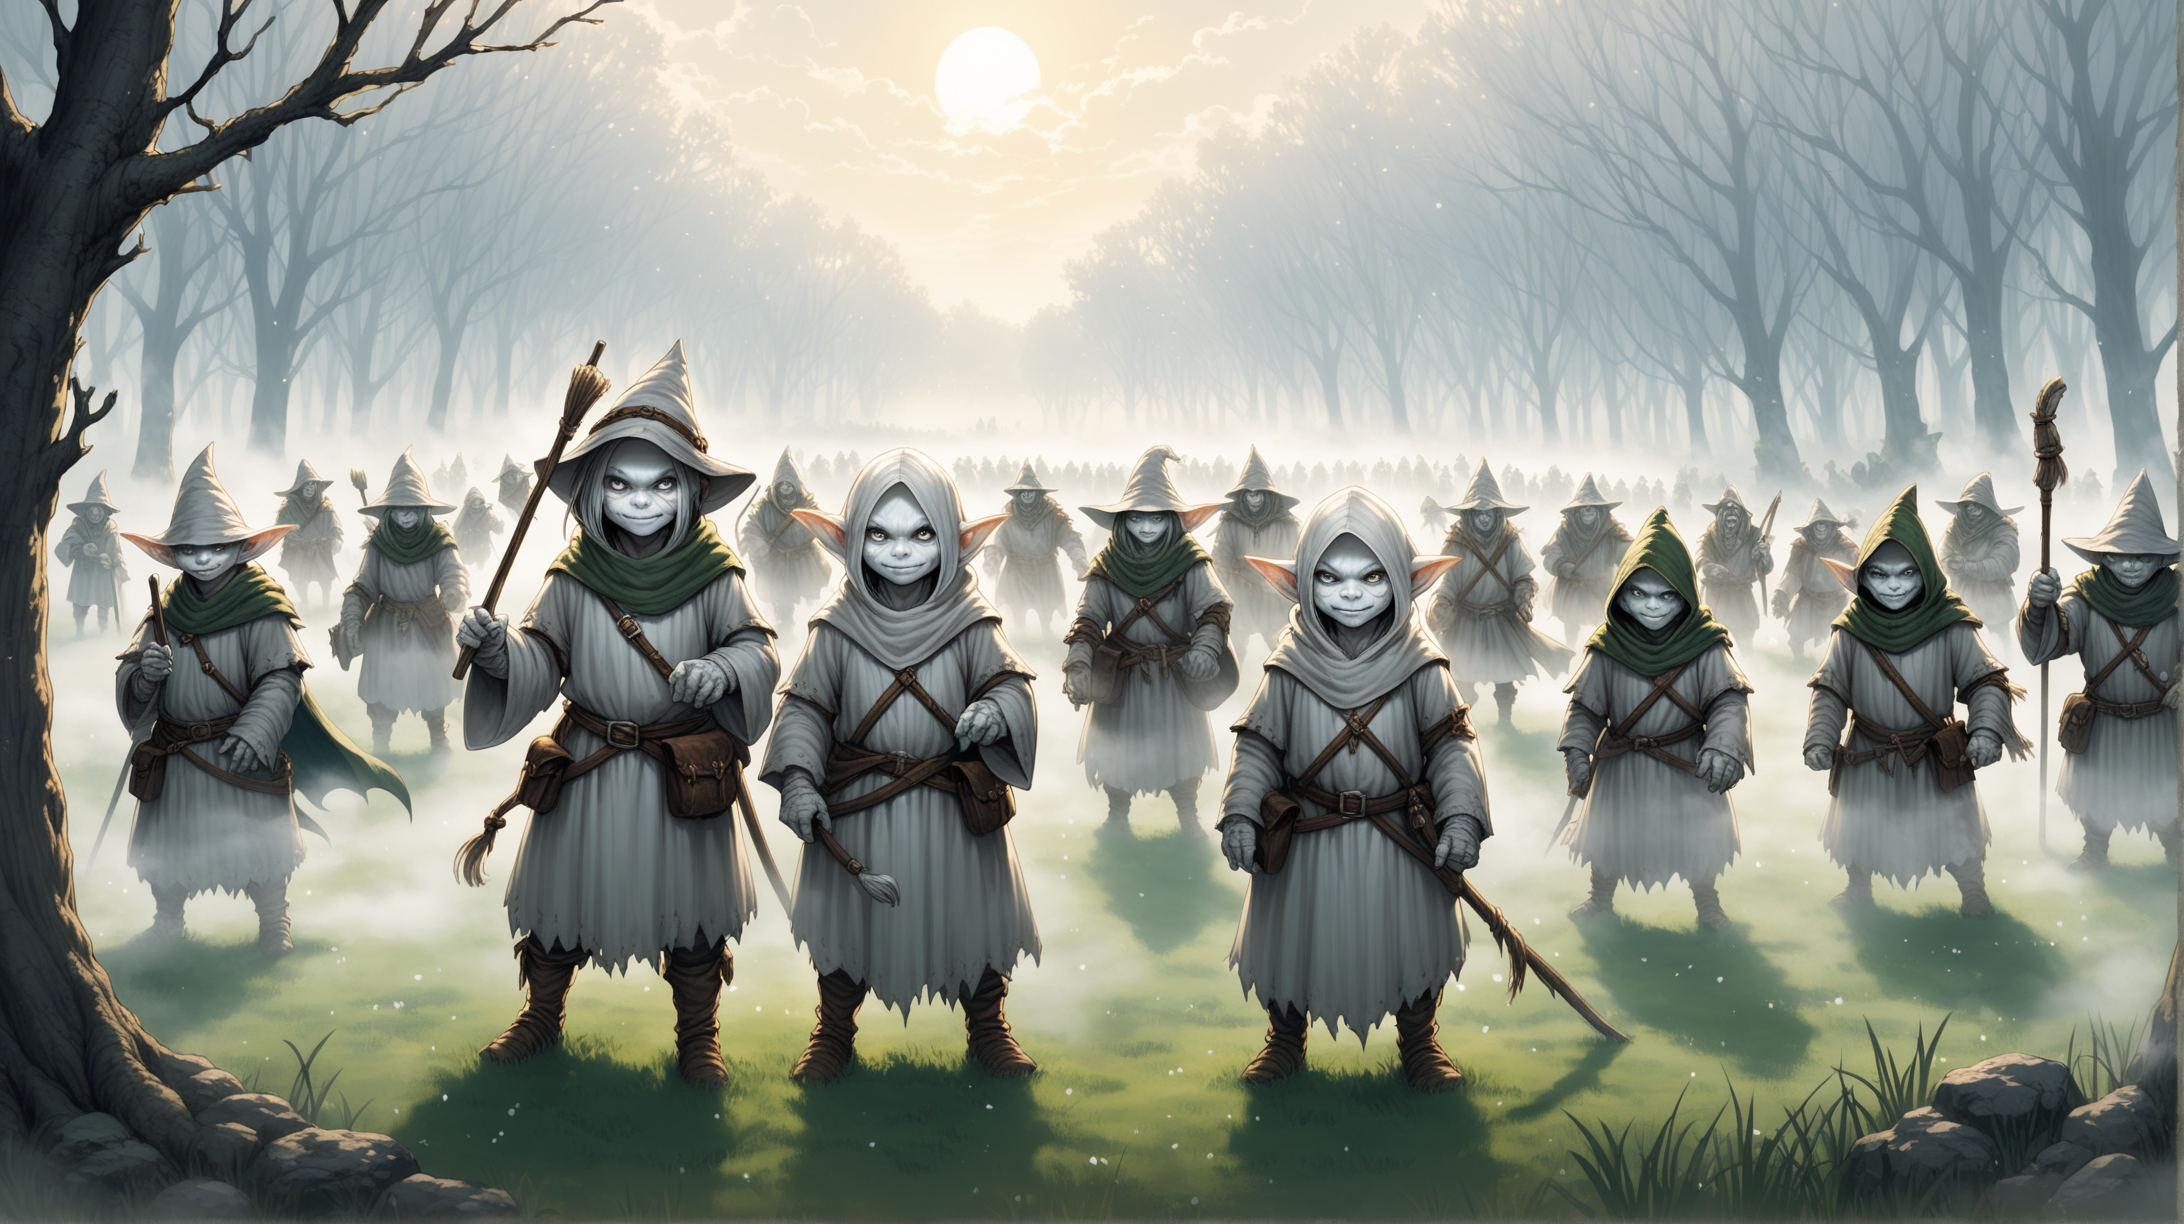 tribe of tiny white goblins with full chalk white skin, rogues and wizards, boys and small girls, countryside white fog, Medieval fantasy